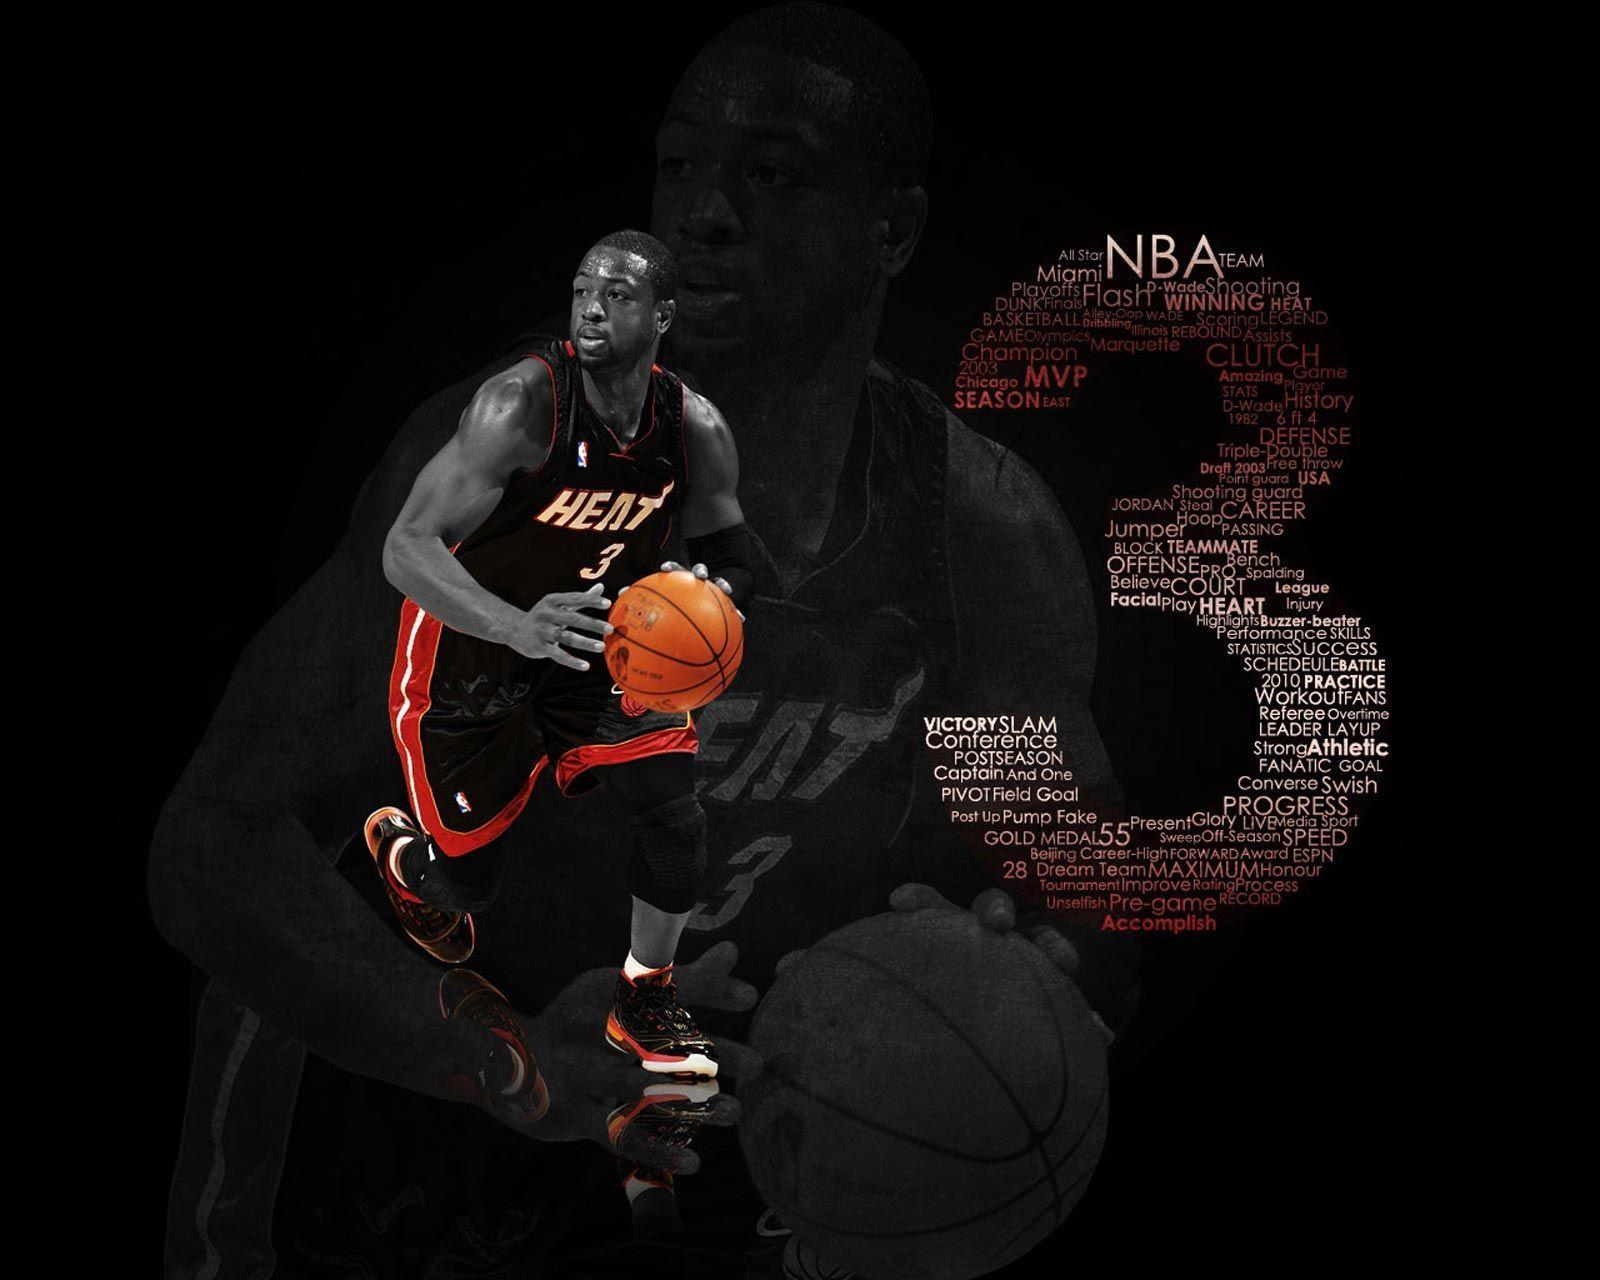 Its All About Basketball: Miami Heat Basketball Club Players HD